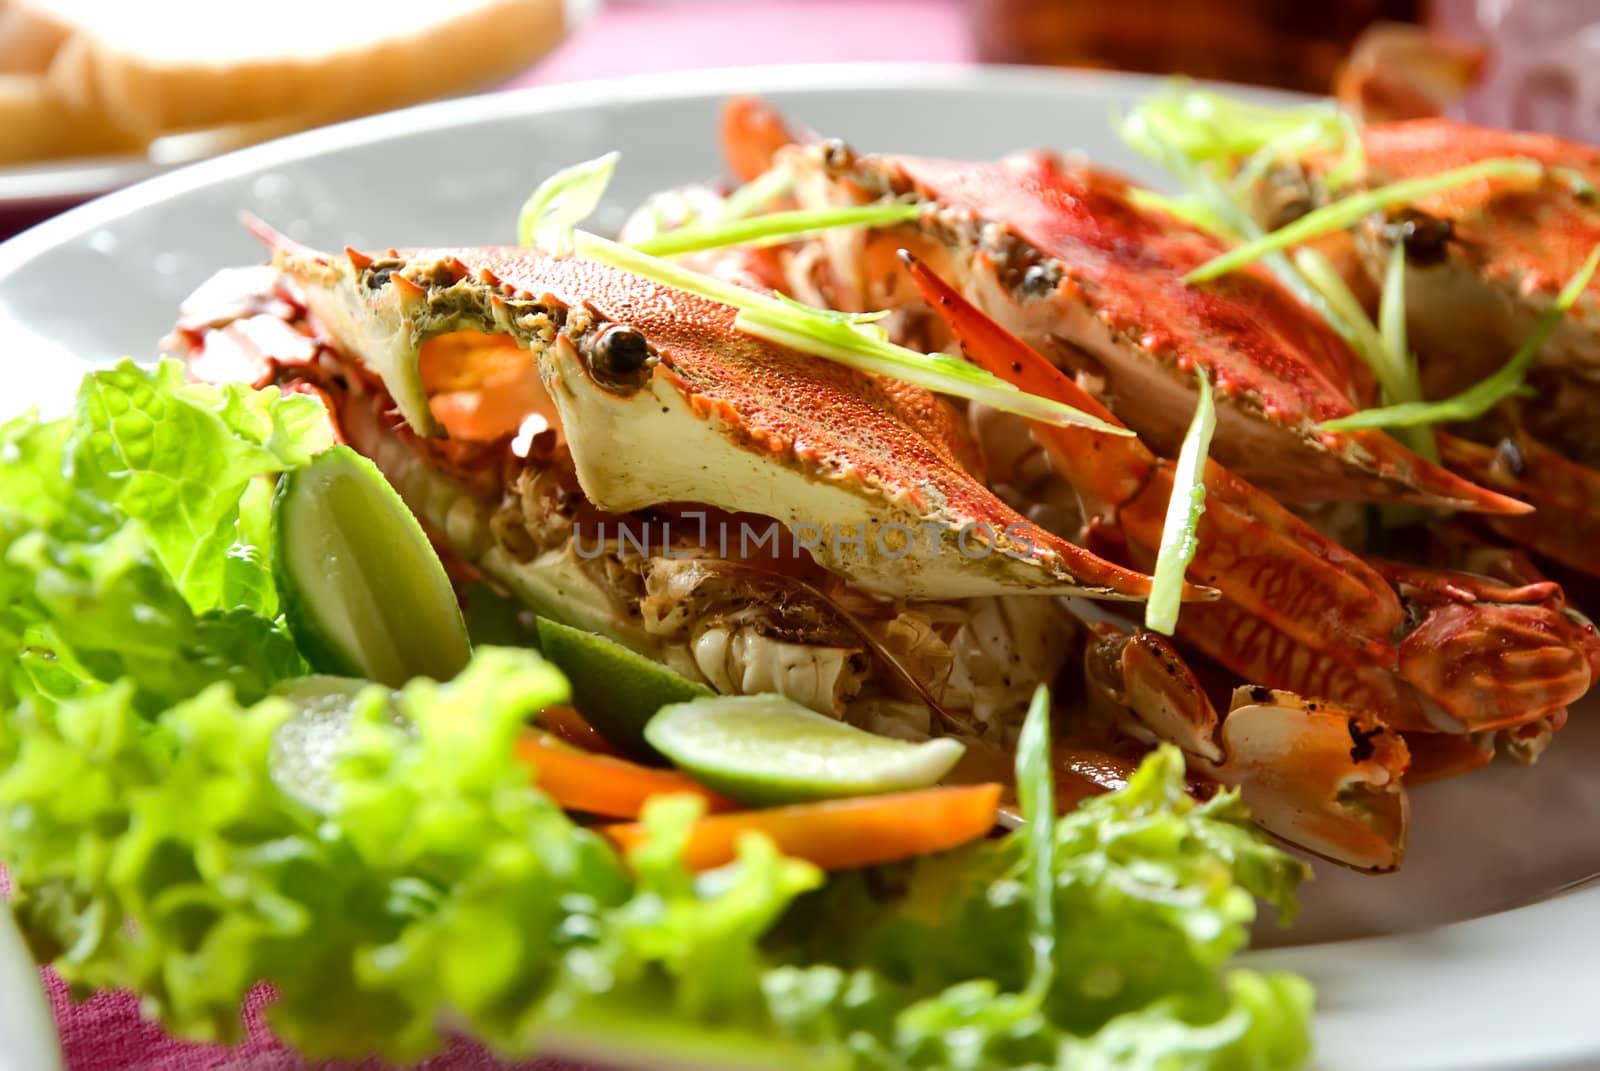 three large red crabs decorated with salad and lime on the plate